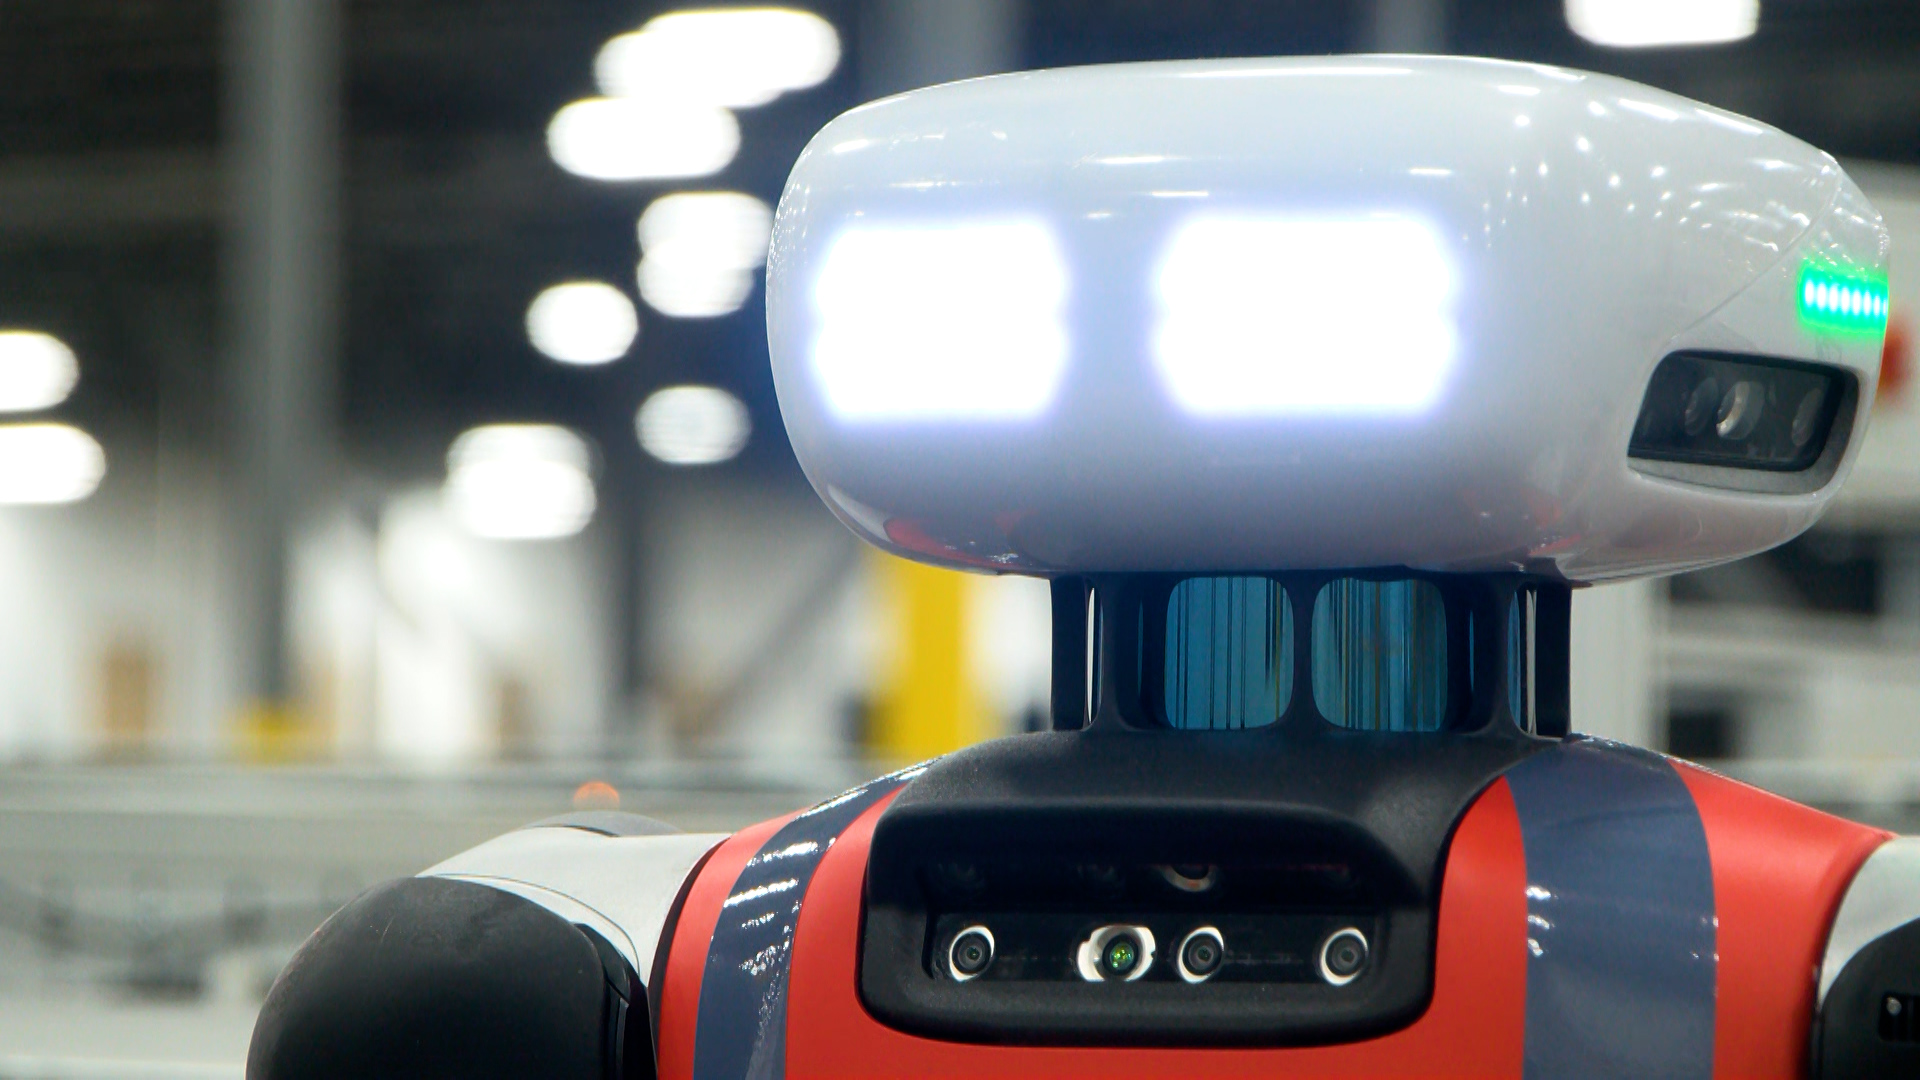 Humanoid robot tested at Spanx warehouse, United States. News story in  Forkliftaction News